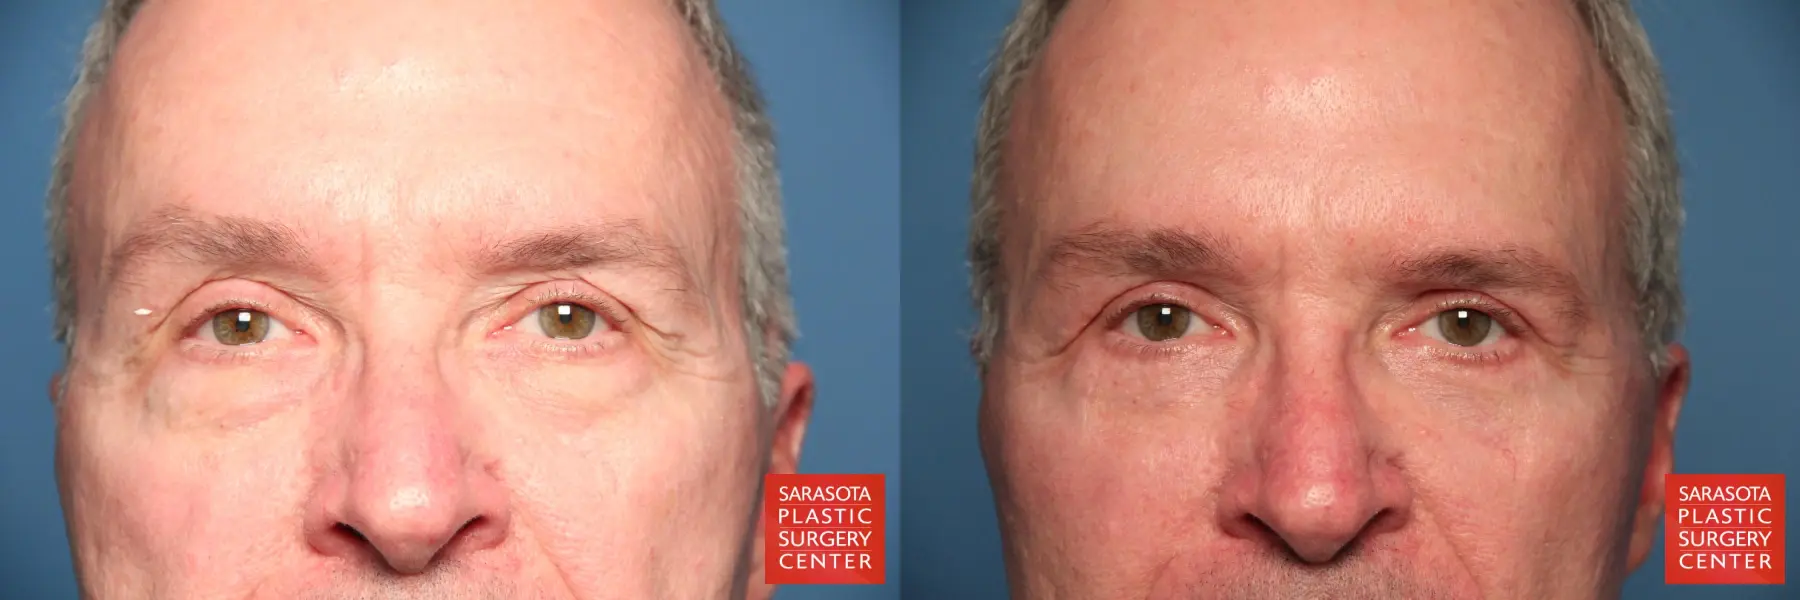 Eyelid-lift-for-men: Patient 2 - Before and After  